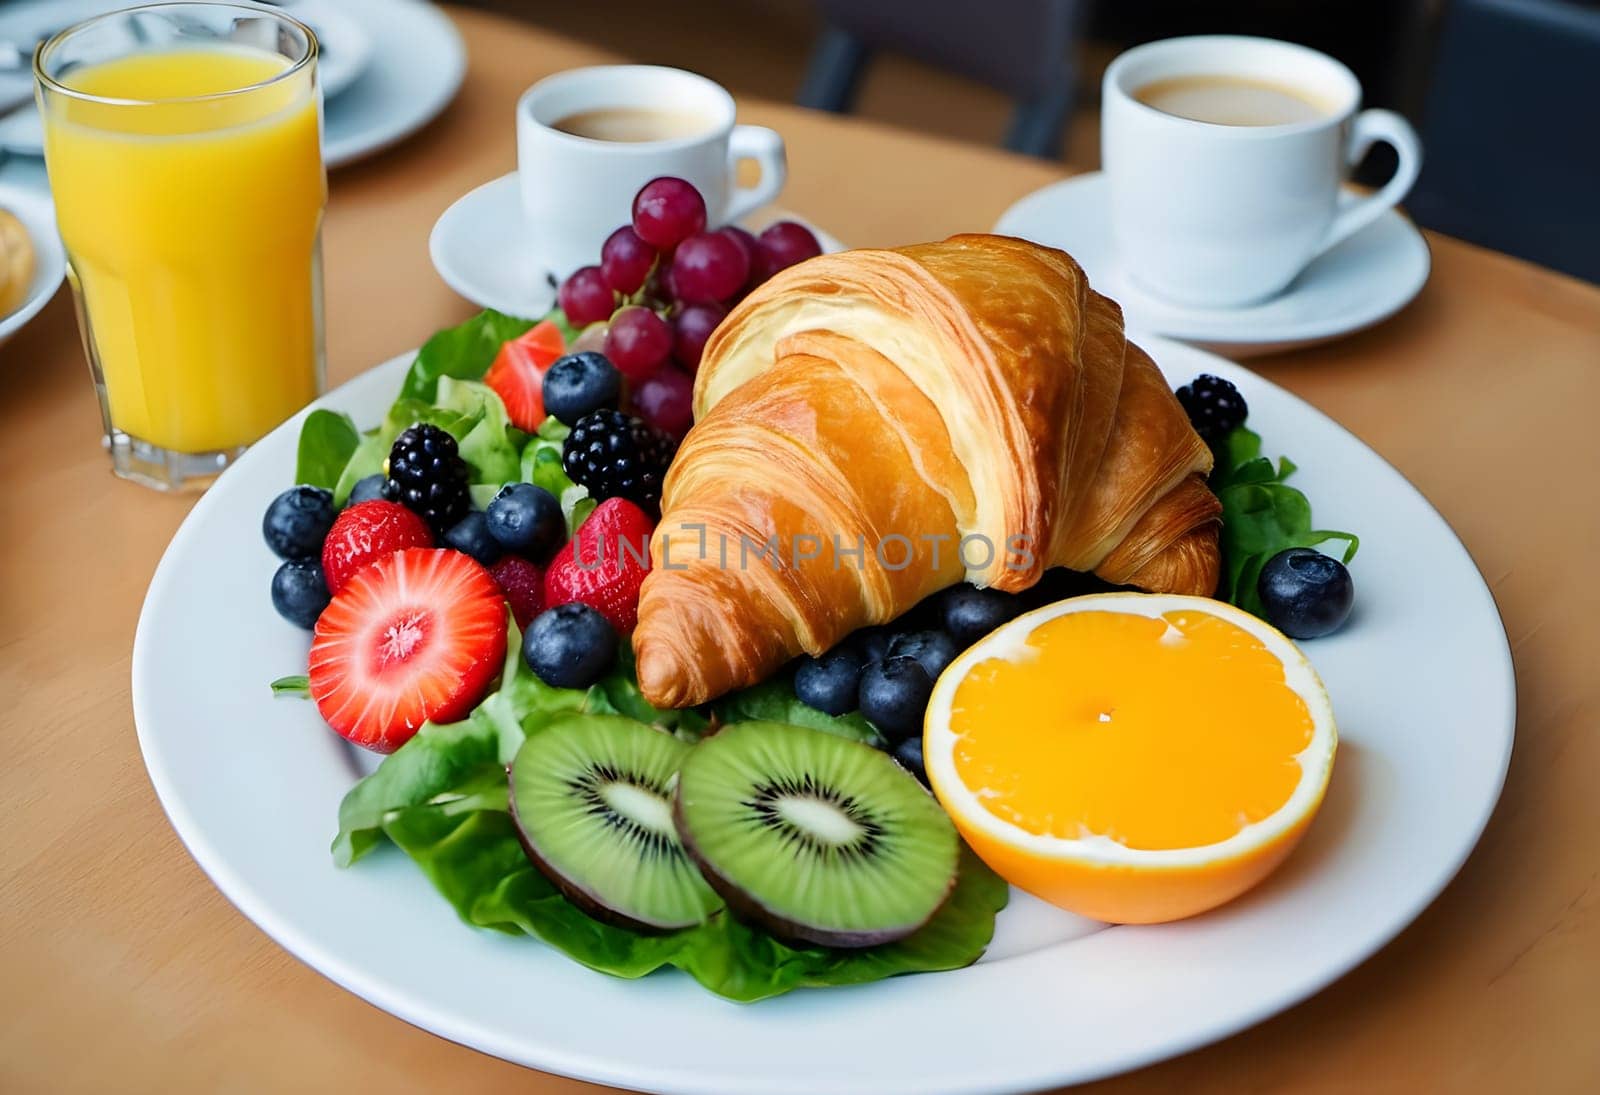 Continental Delights Gourmet Breakfast Creations with Croissants, Eggs, and Fresh Fruits by Petrichor